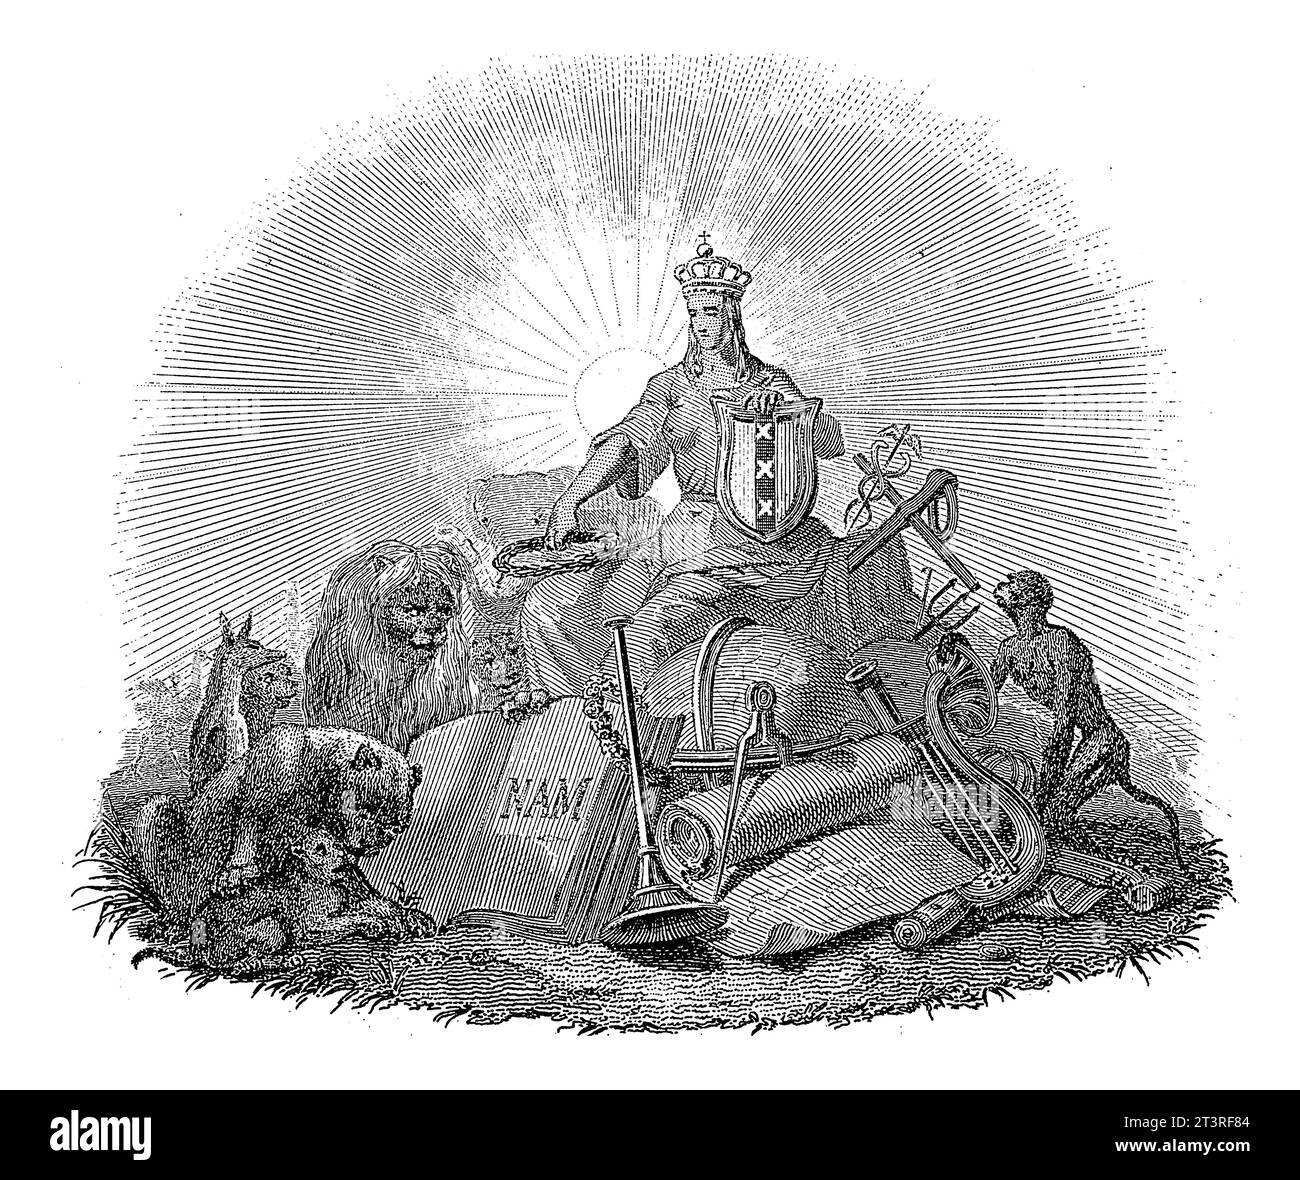 Amsterdam Town Maid with Wild Animals, Willem Frederik Wehmeyer, after Barend Wijnveld, 1863 The Amsterdam Town Maid enthroned in the centre. Stock Photo